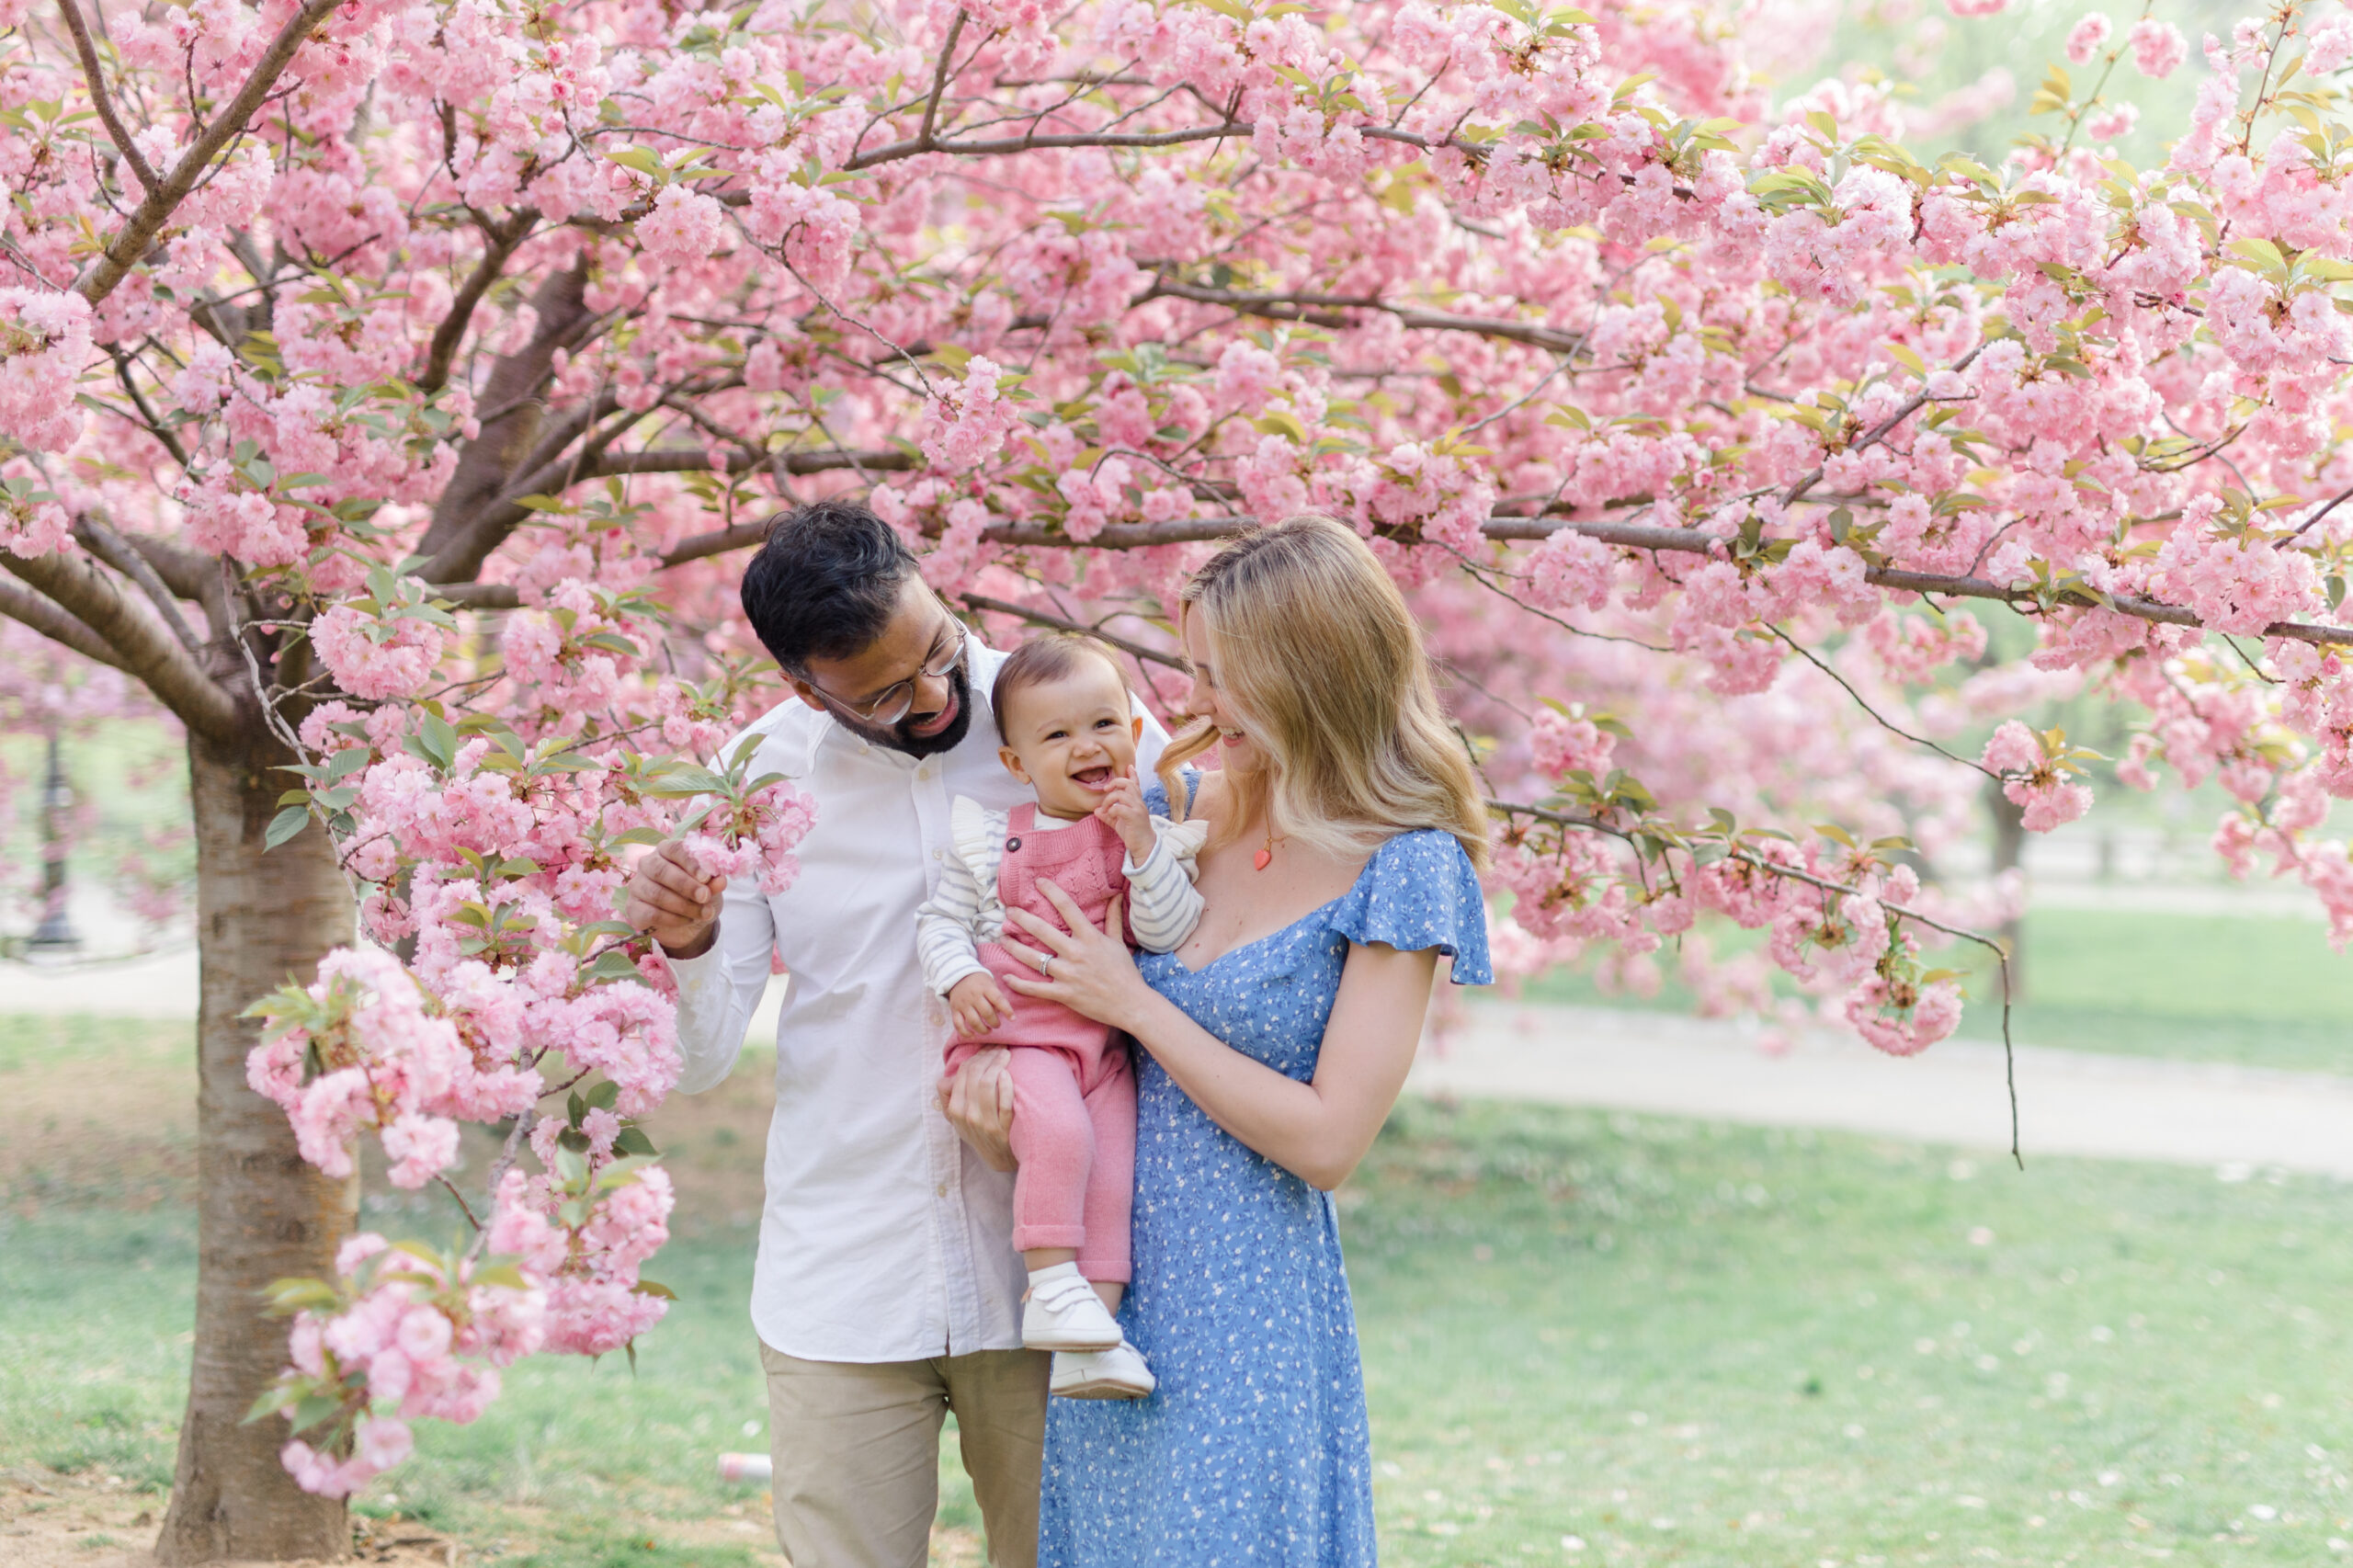 A family at a spring mini session in Central Park with the cherry blossoms, shot by Jacqueline Clair Photography